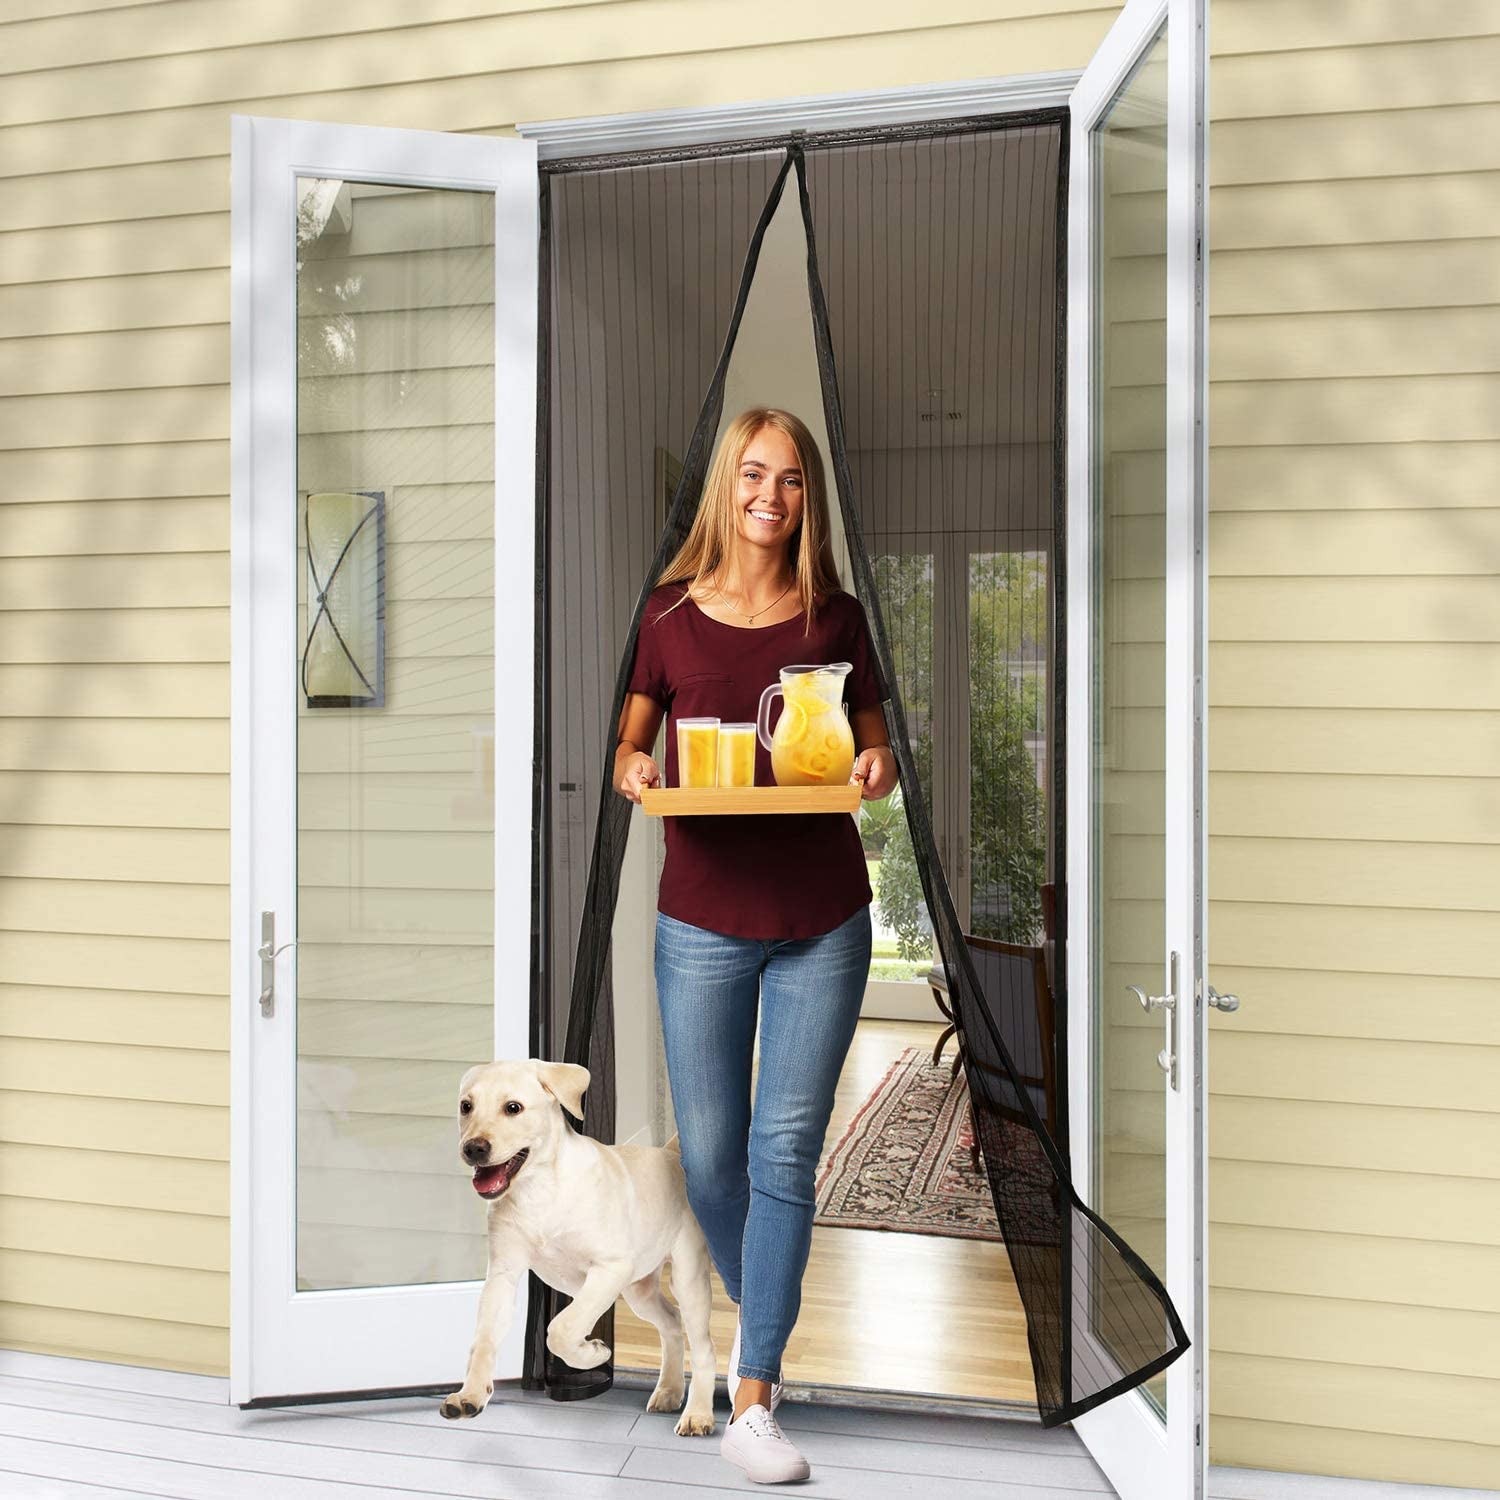 Model easily walking through the instant screen door with hands full of beverages and a dog in tow